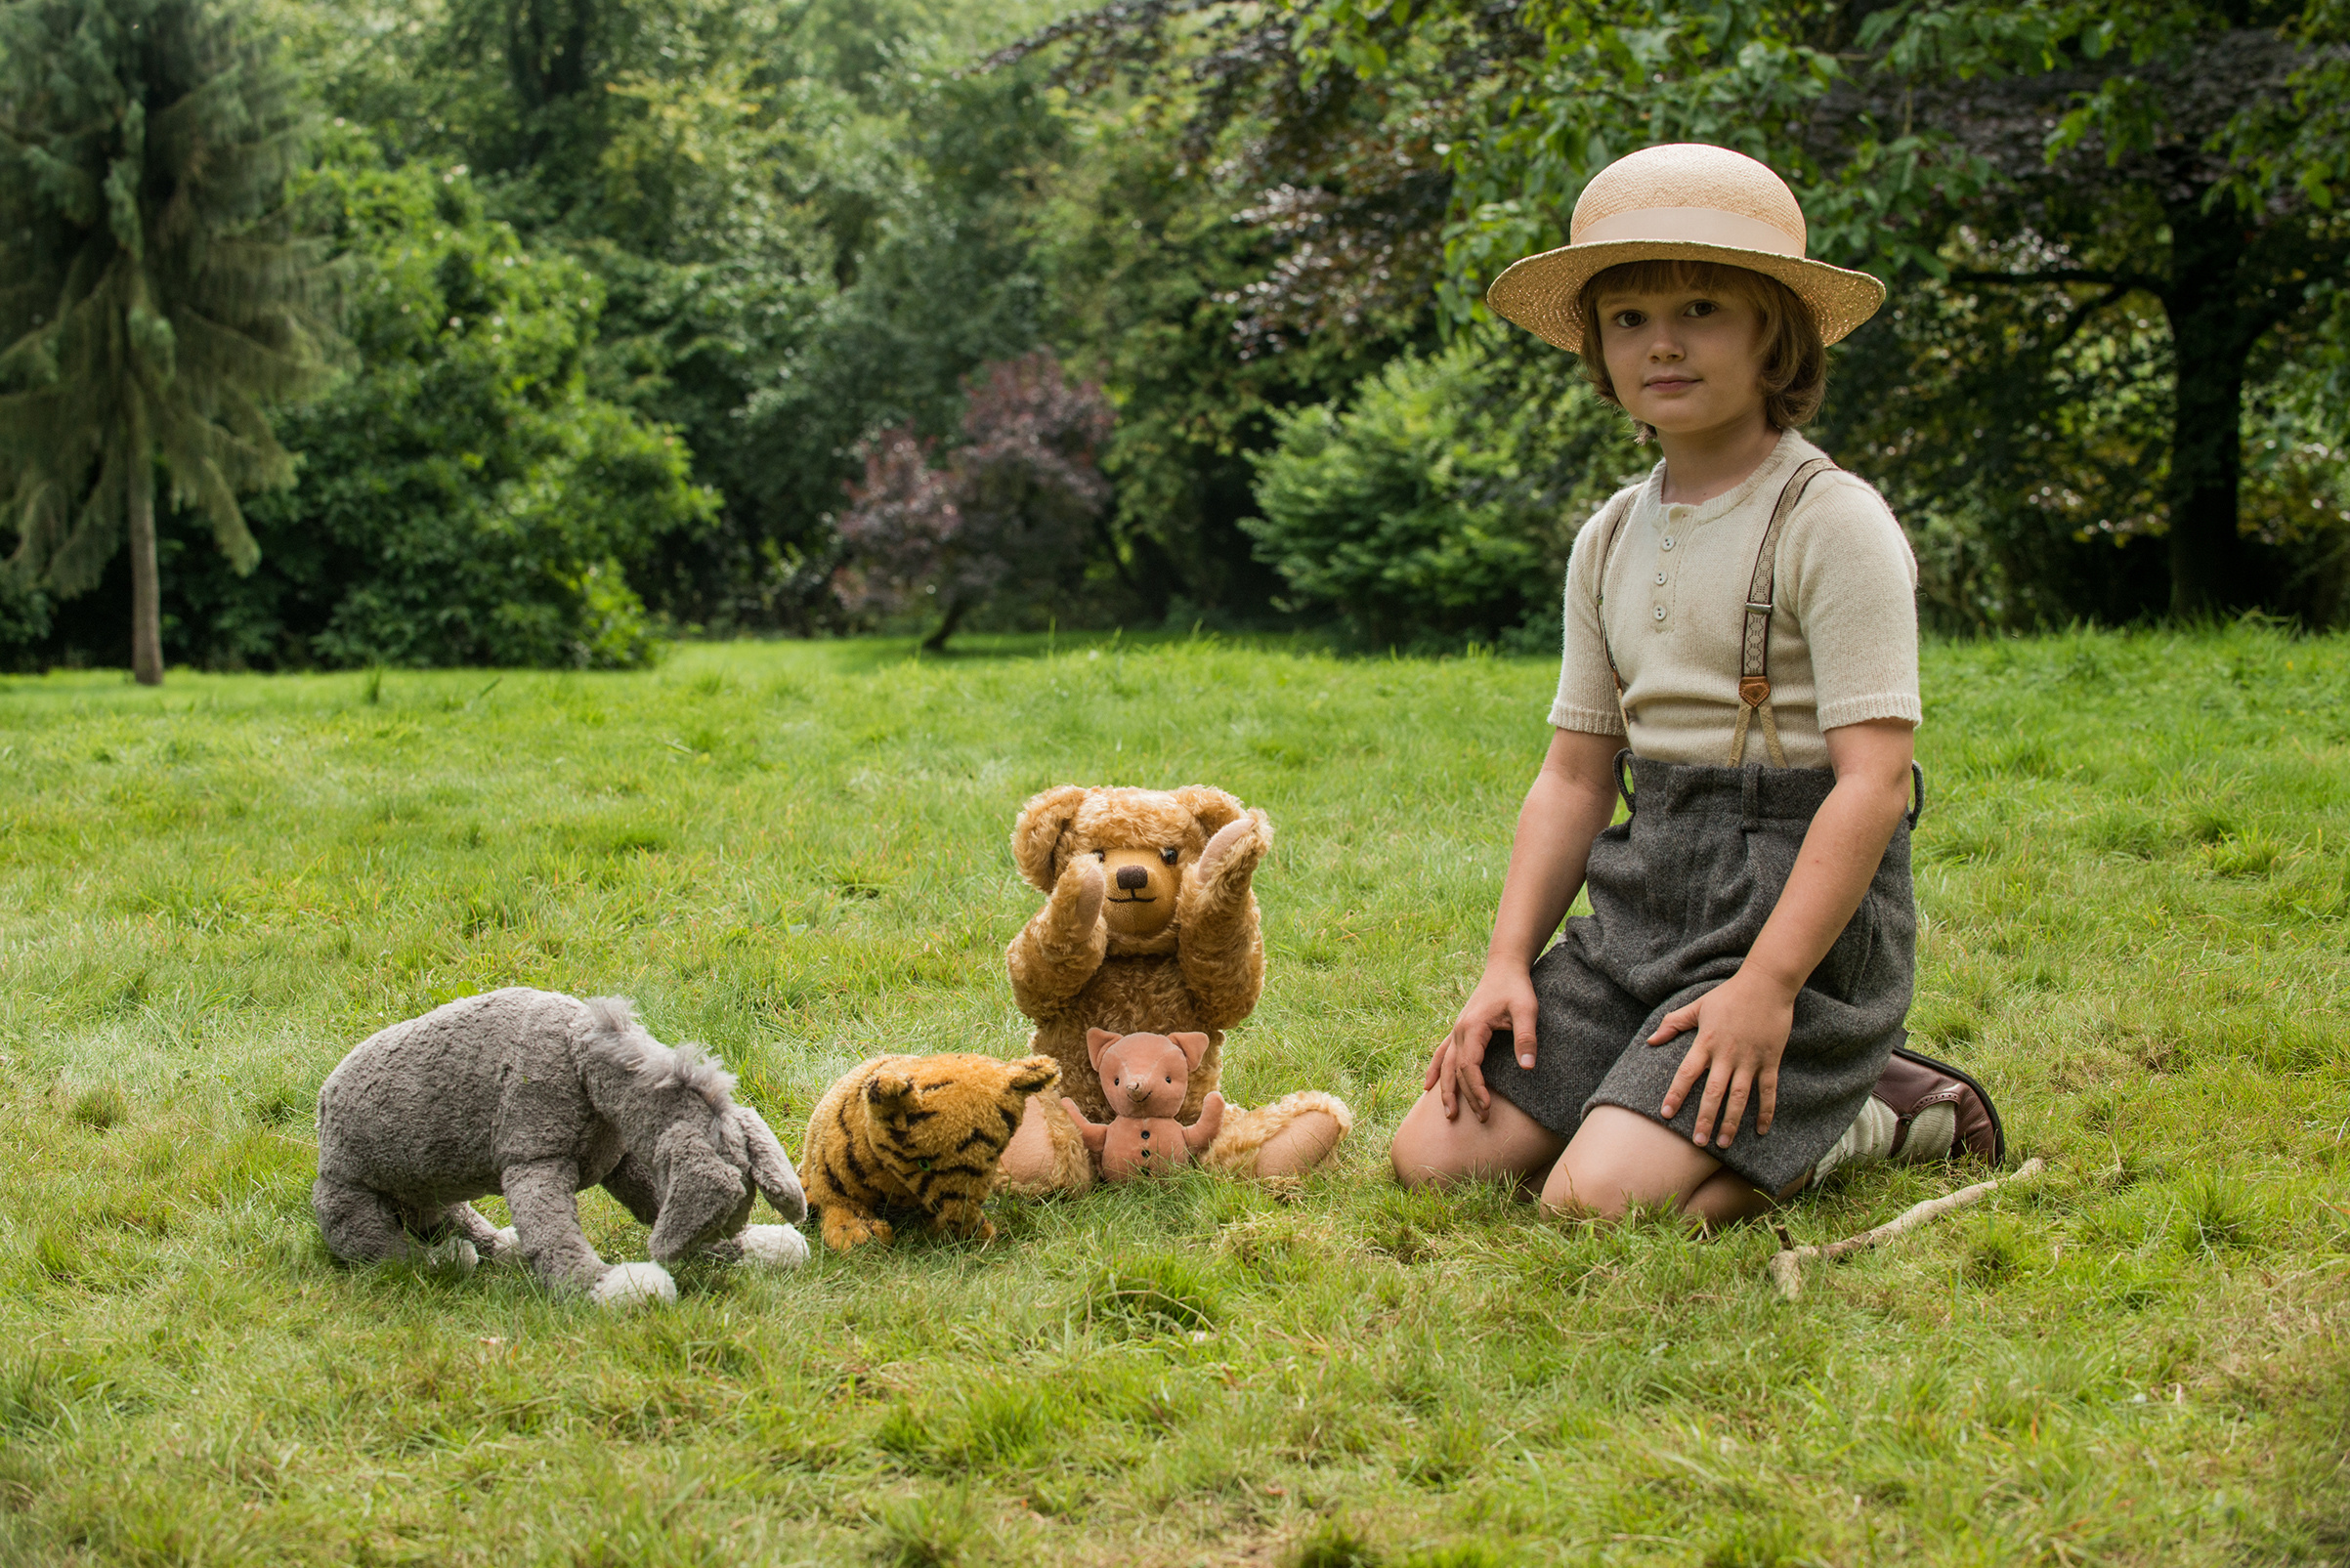 Christopher Robin (Movie): An English boy, Adventures with Winnie-the-Pooh, Piglet, Will Tilston. 2410x1610 HD Wallpaper.